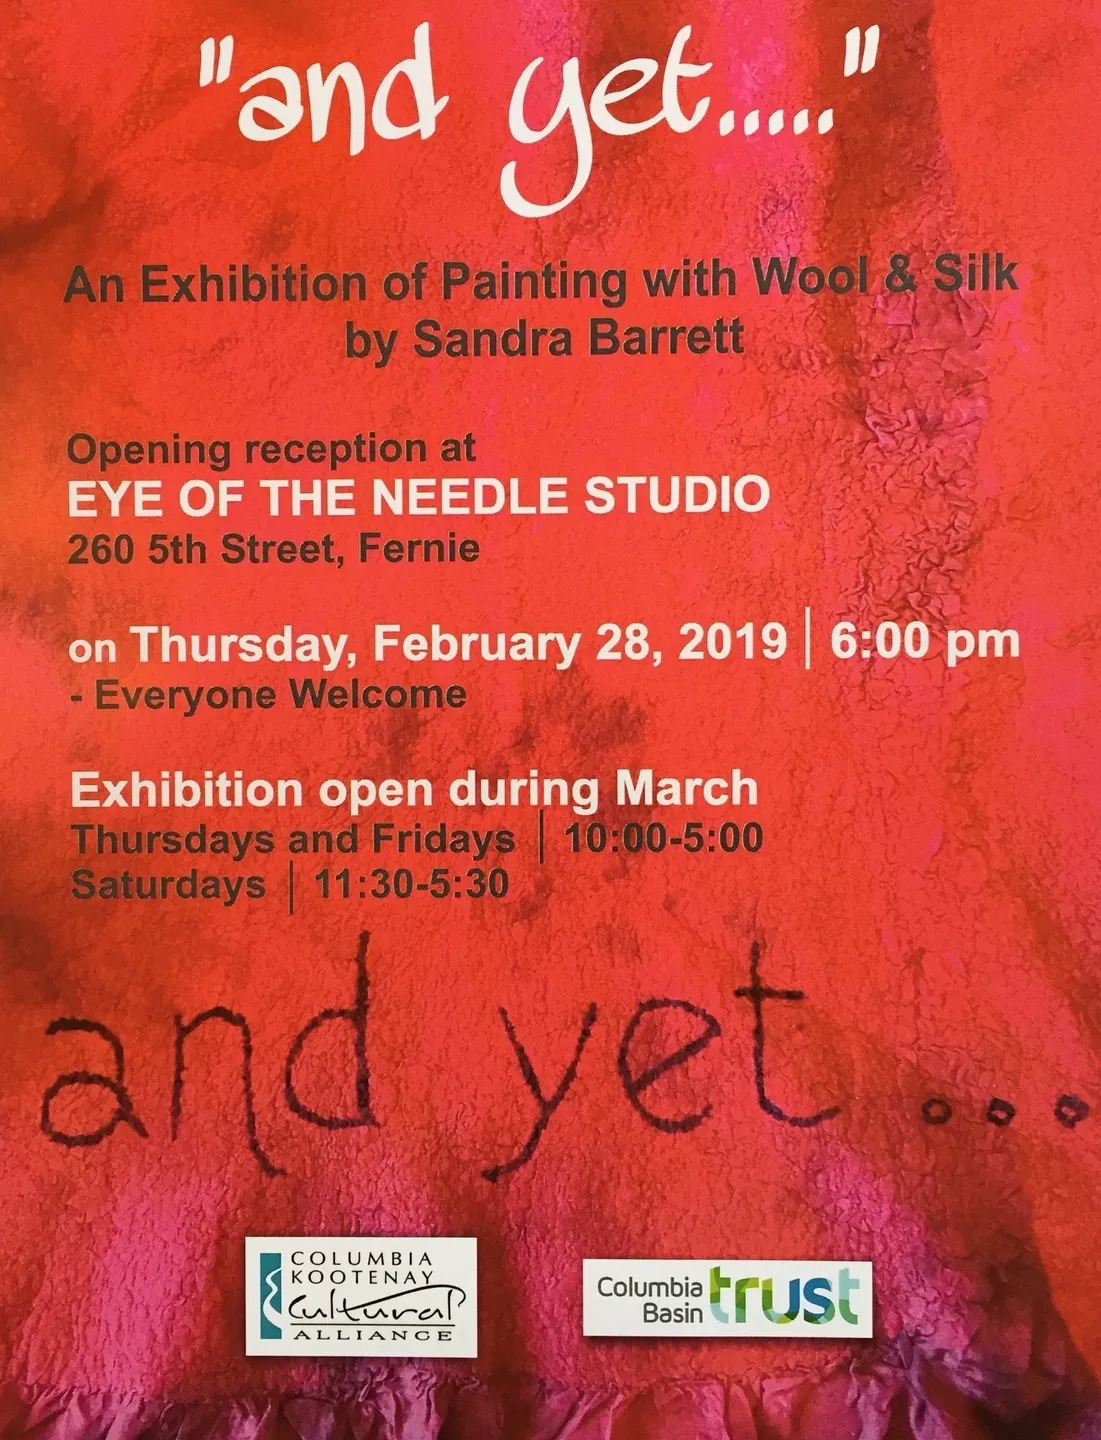 A poster for an exhibition of paintings by sandra barrett.